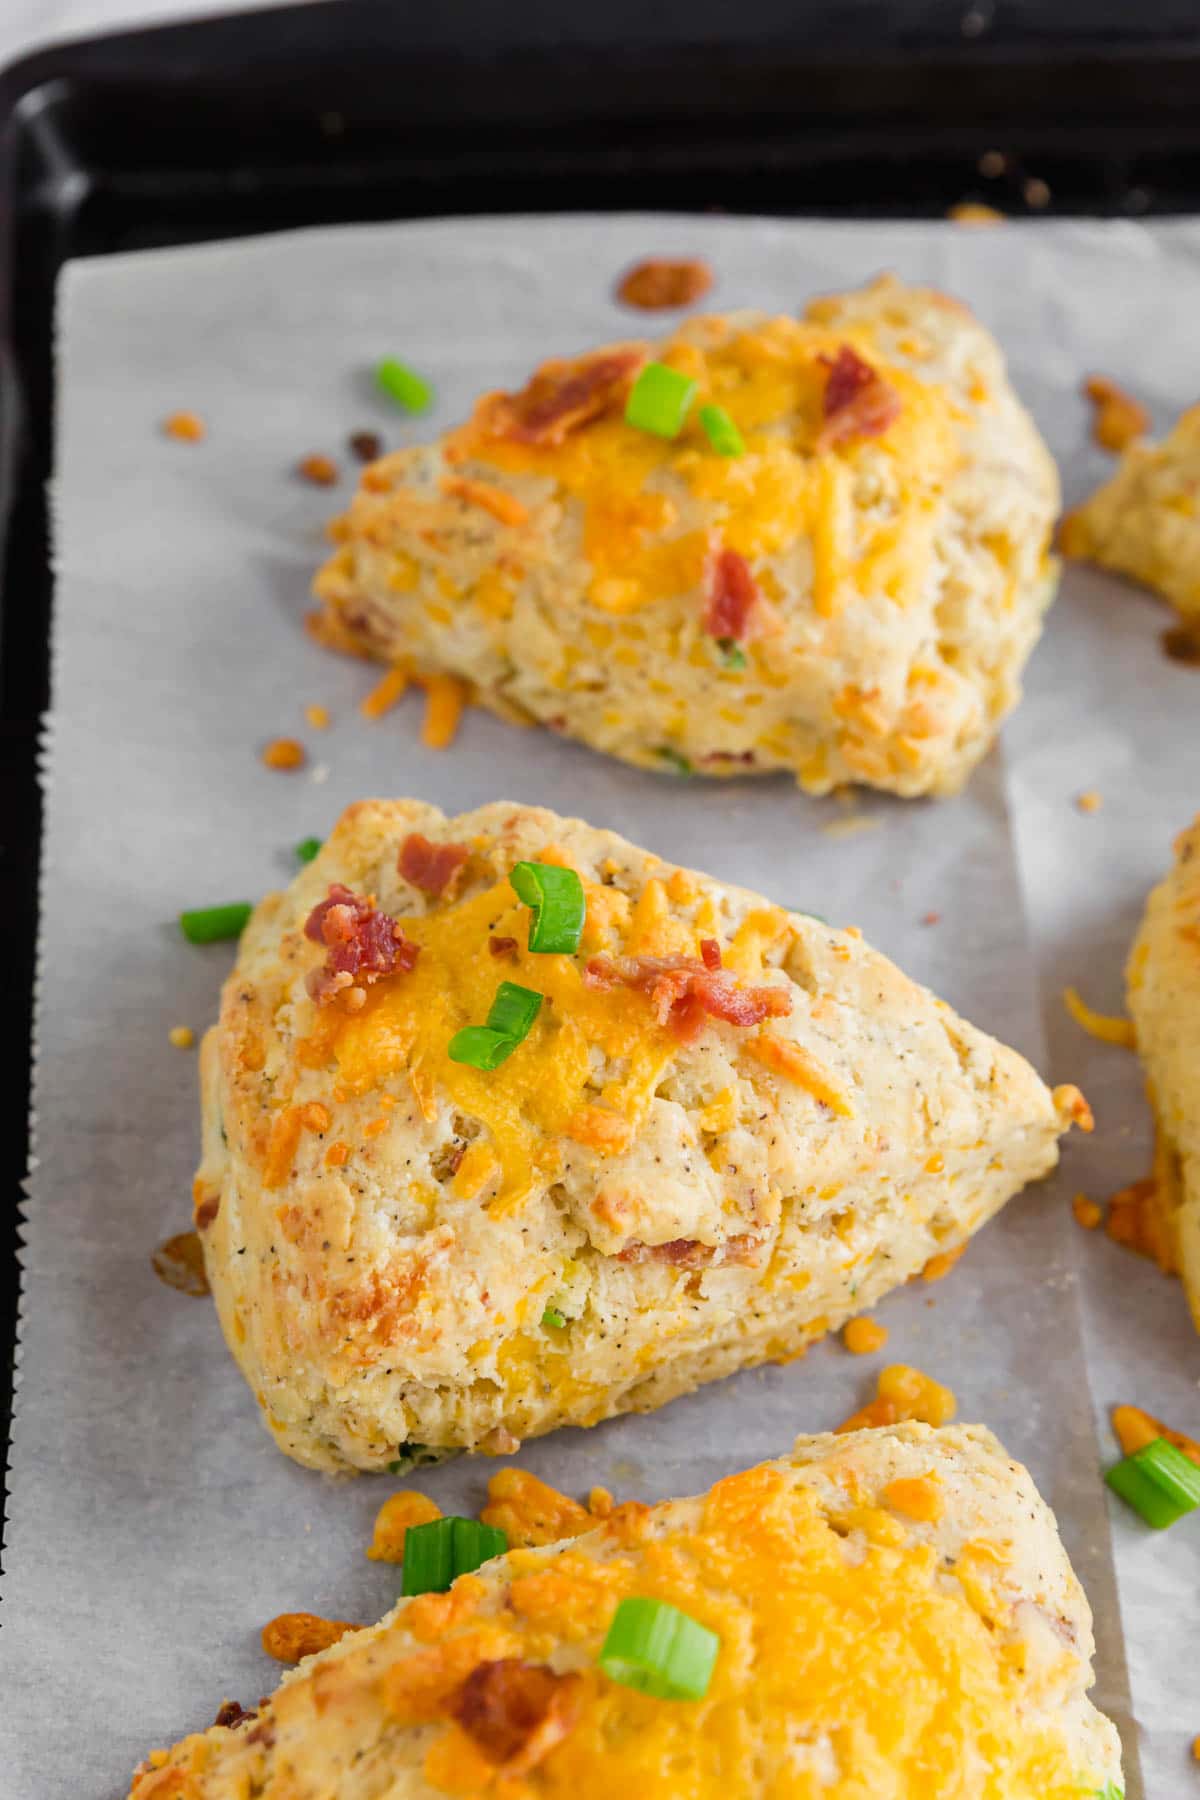 A baking sheet with fresh baked gluten-free cheddar bacon scones straight from the oven.